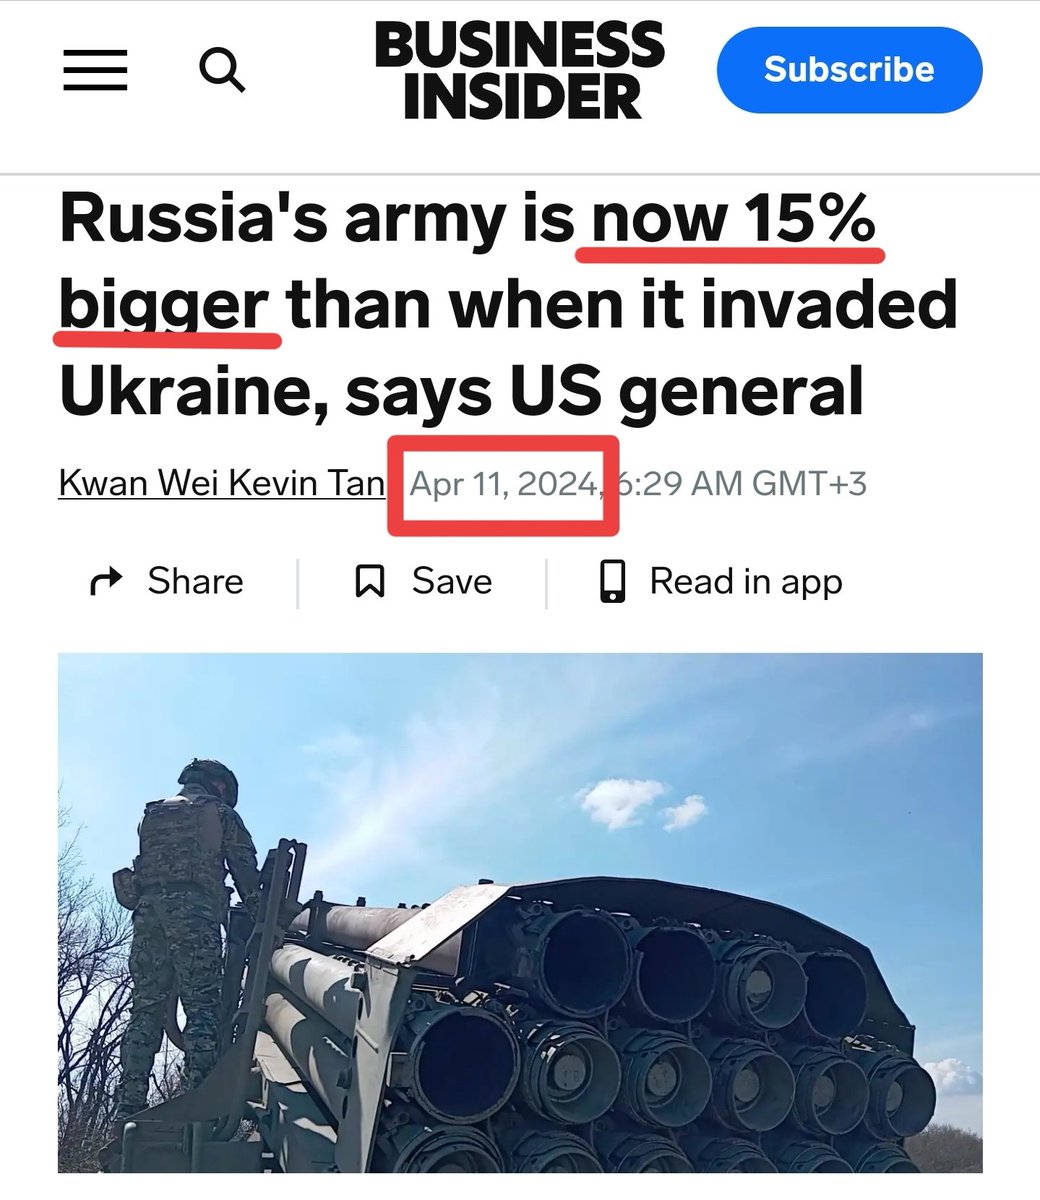 Russia’s Army now 15% larger than when it began its Ukraine offensive. “Over the past year Russia increased its front line troop strength from 360,000 to 470,000.” -- The US Army Gen. Cavoli How it started⬇️ How it's going⬇️